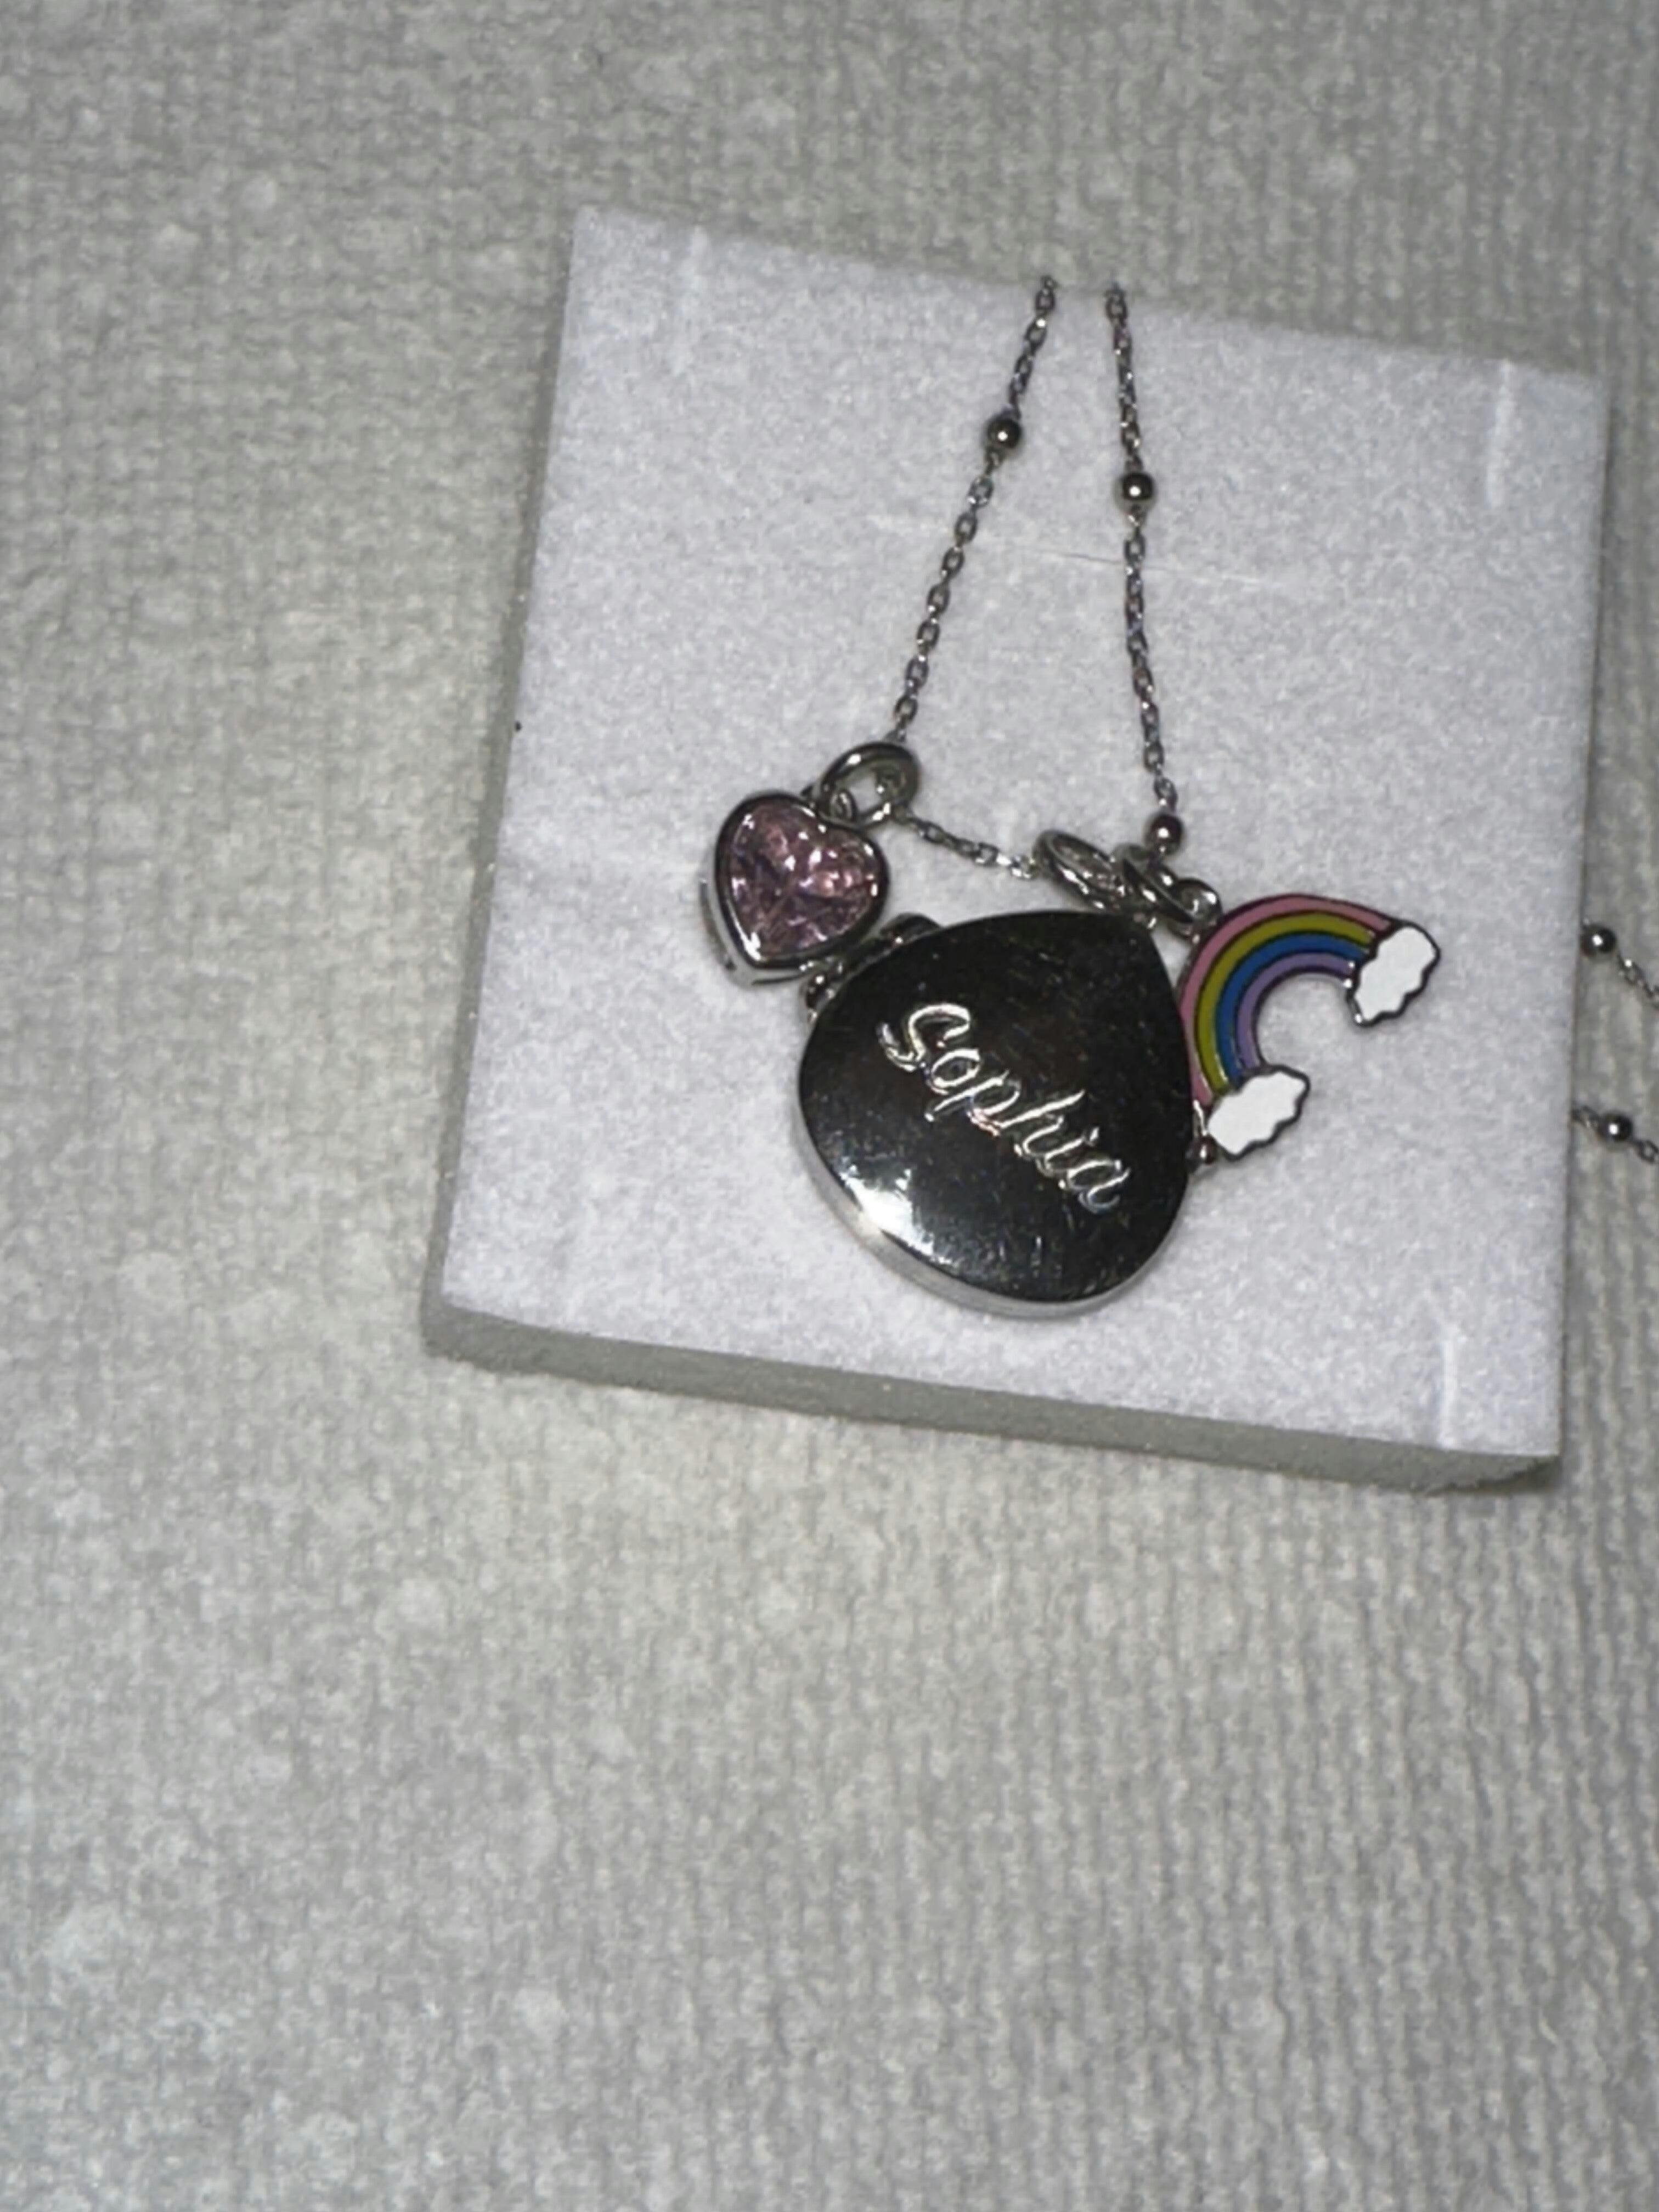 Magical Rainbow Kids / Children's / Girls Pendant/Necklace With Charms